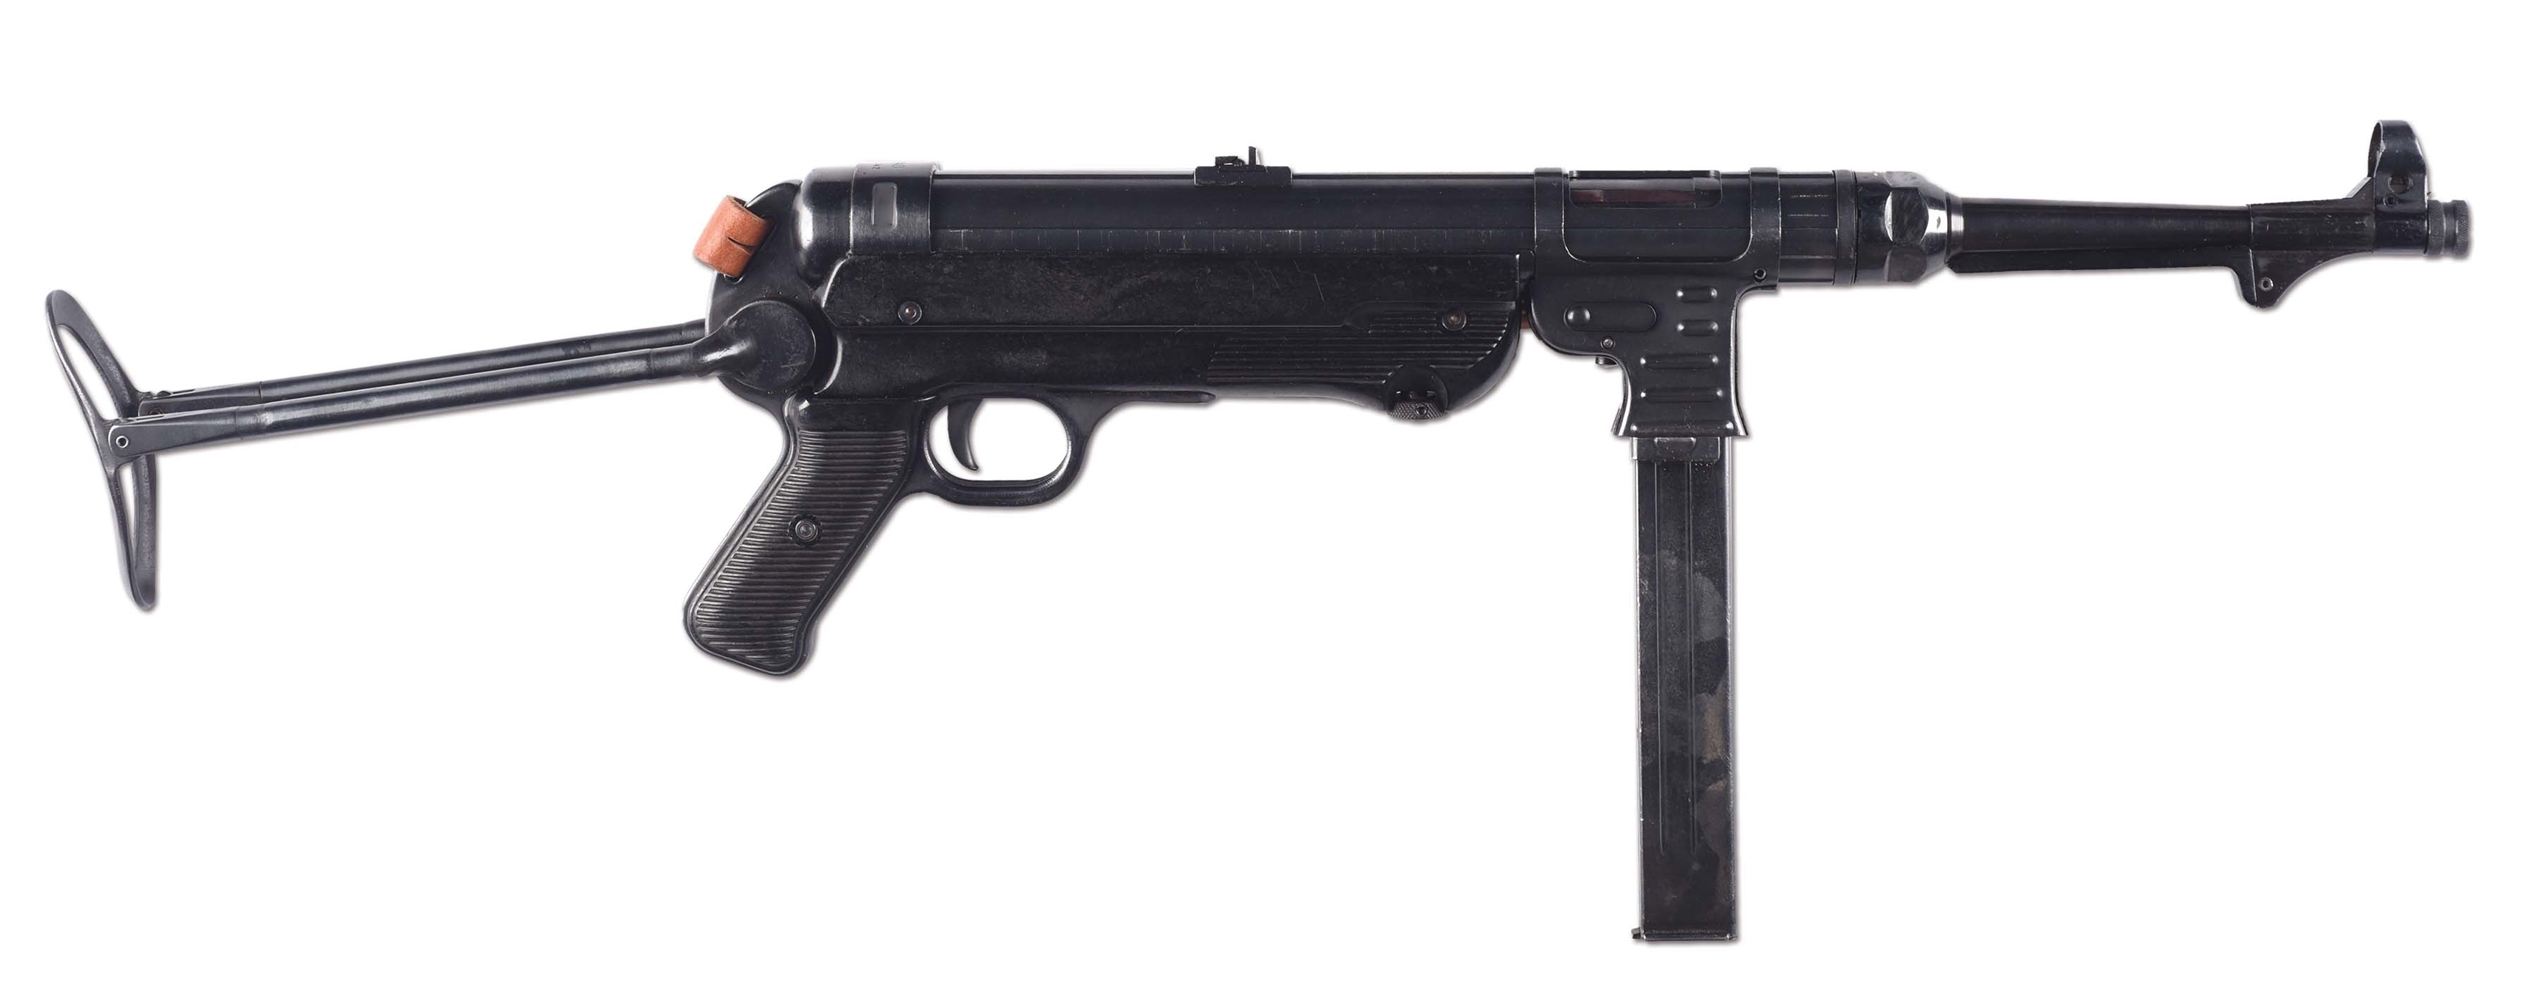 (N) EXCEPTIONAL CONDITION GERMAN MP-40 ON WILSON REGISTERED TUBE MACHINE GUN (FULLY TRANSFERABLE).